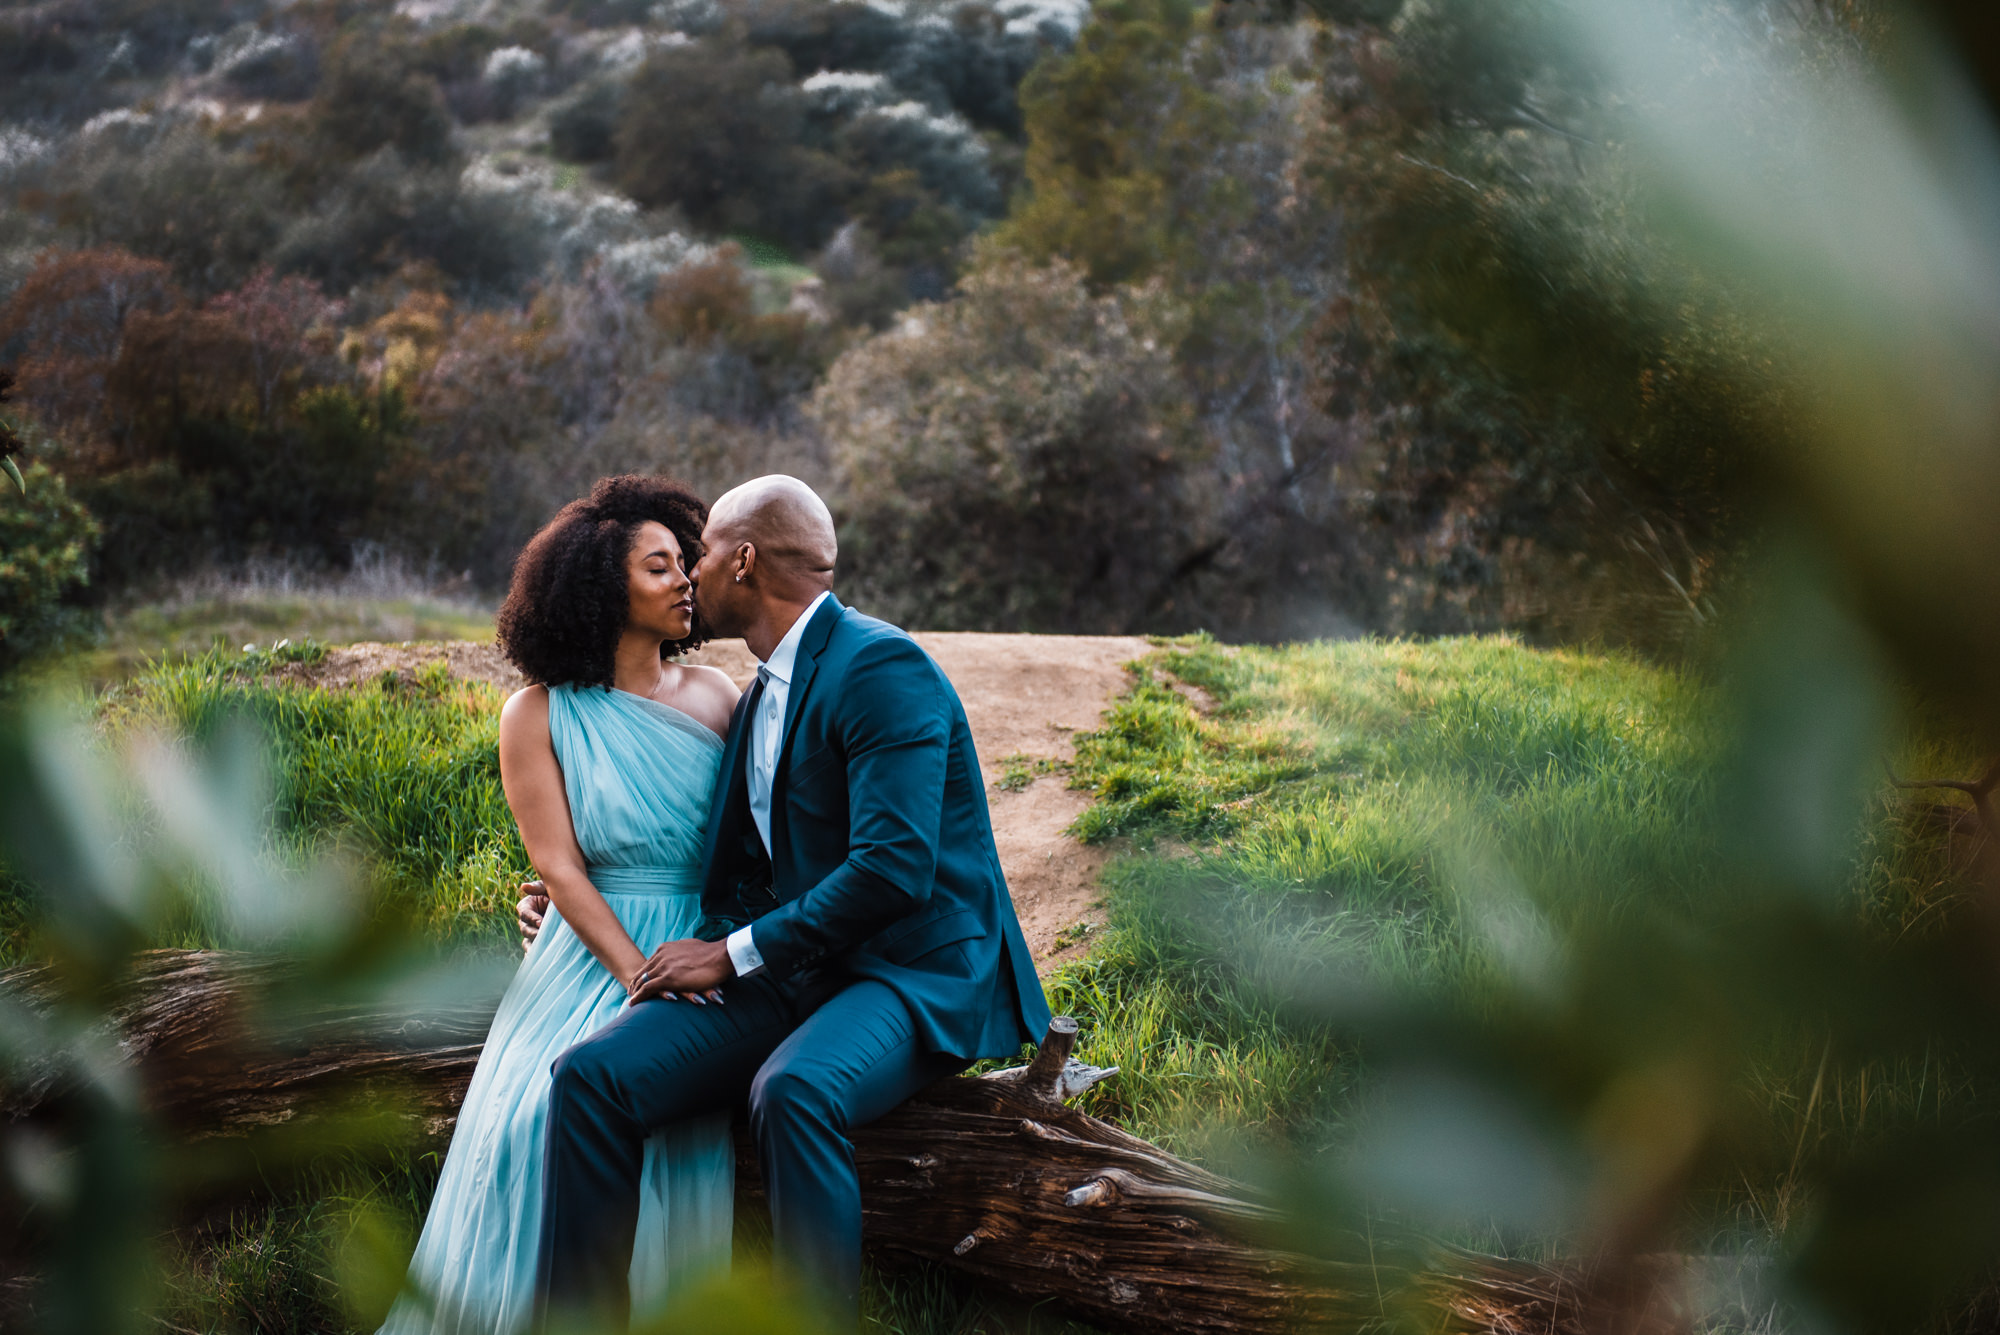 couple kisses on a fallen tree during the day of their elopement dressed in blue wedding attire